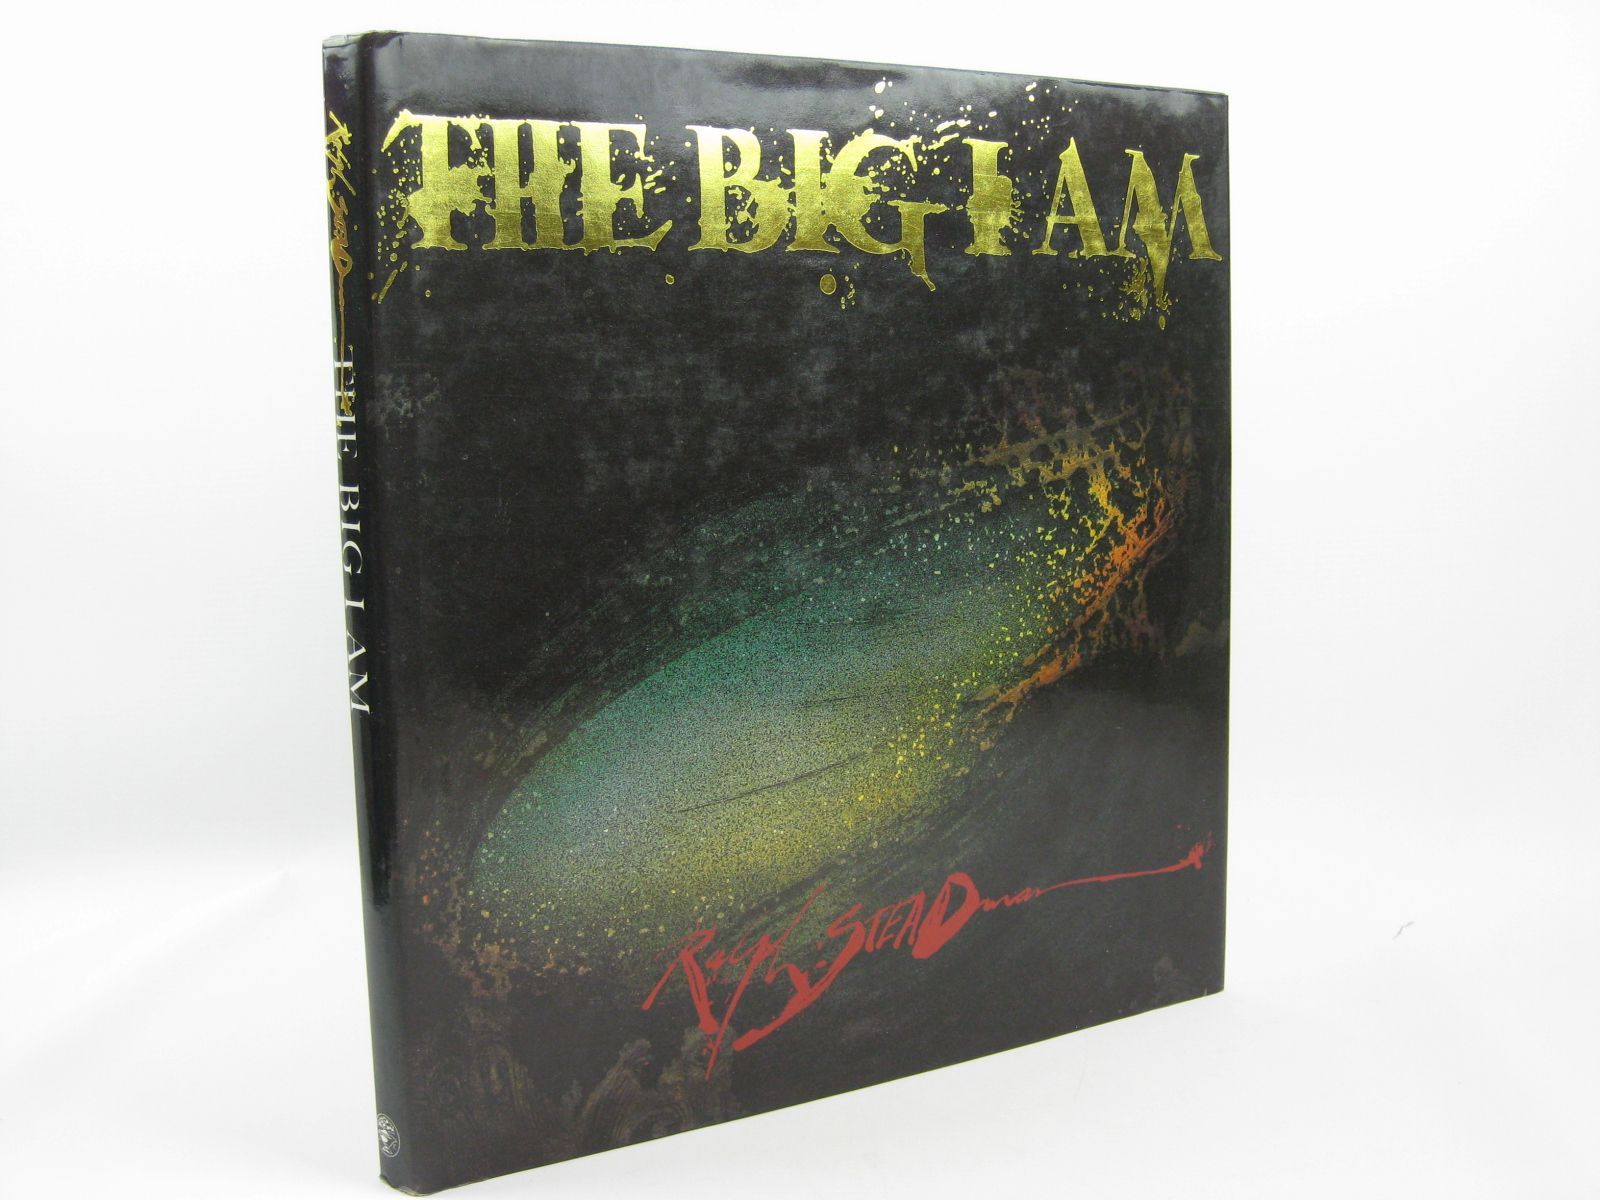 Photo of THE BIG I AM written by Steadman, Ralph illustrated by Steadman, Ralph published by Jonathan Cape (STOCK CODE: 1316253)  for sale by Stella & Rose's Books